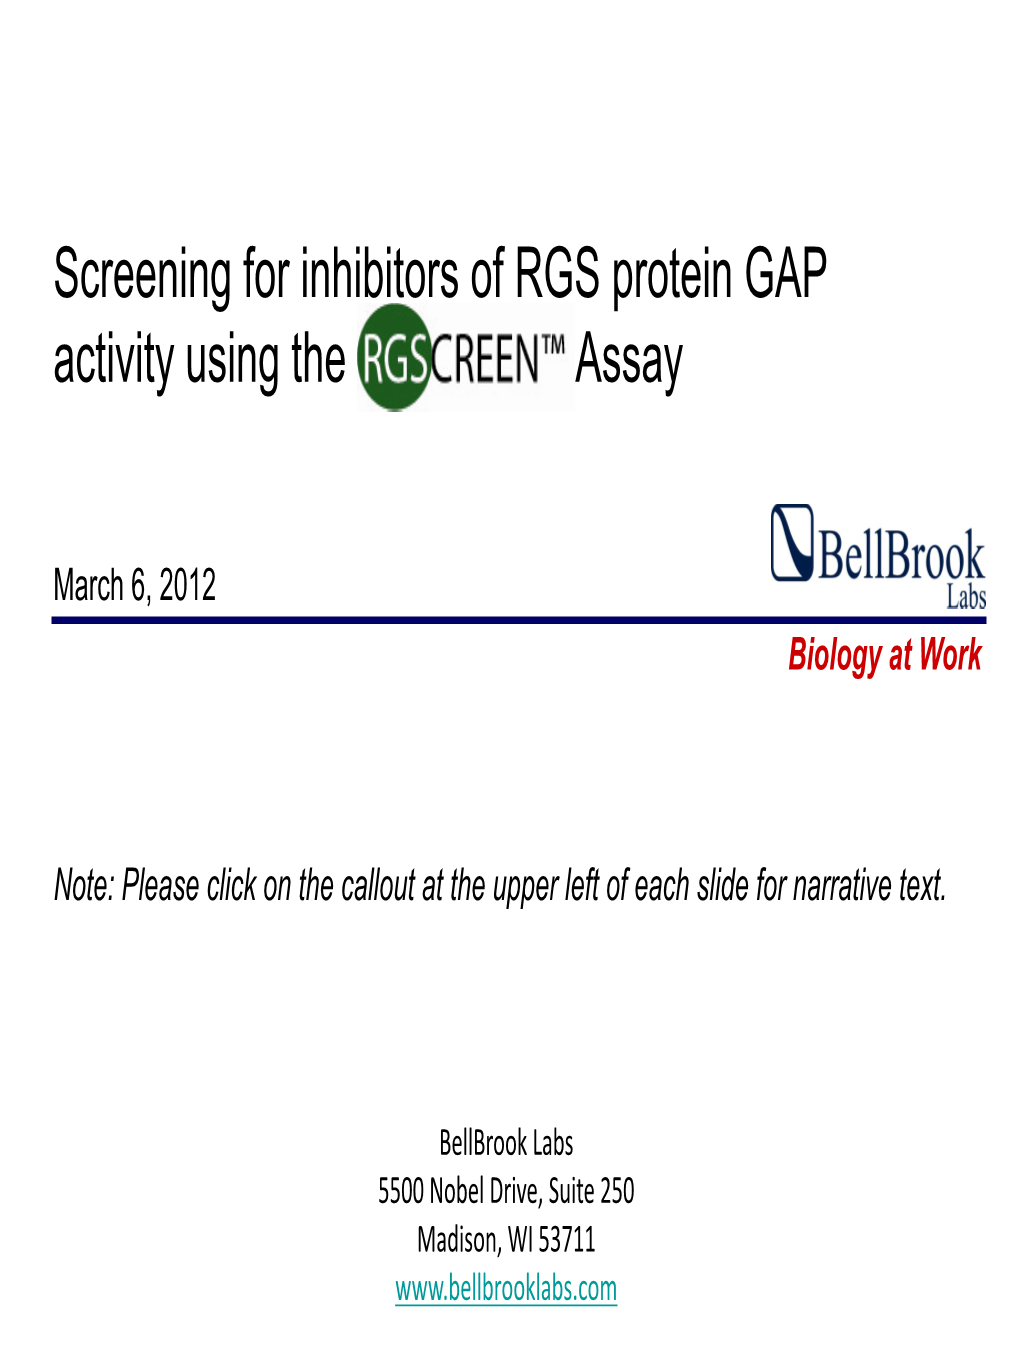 Screening for Inhibitors of RGS Protein GAP Activity Using the Assay